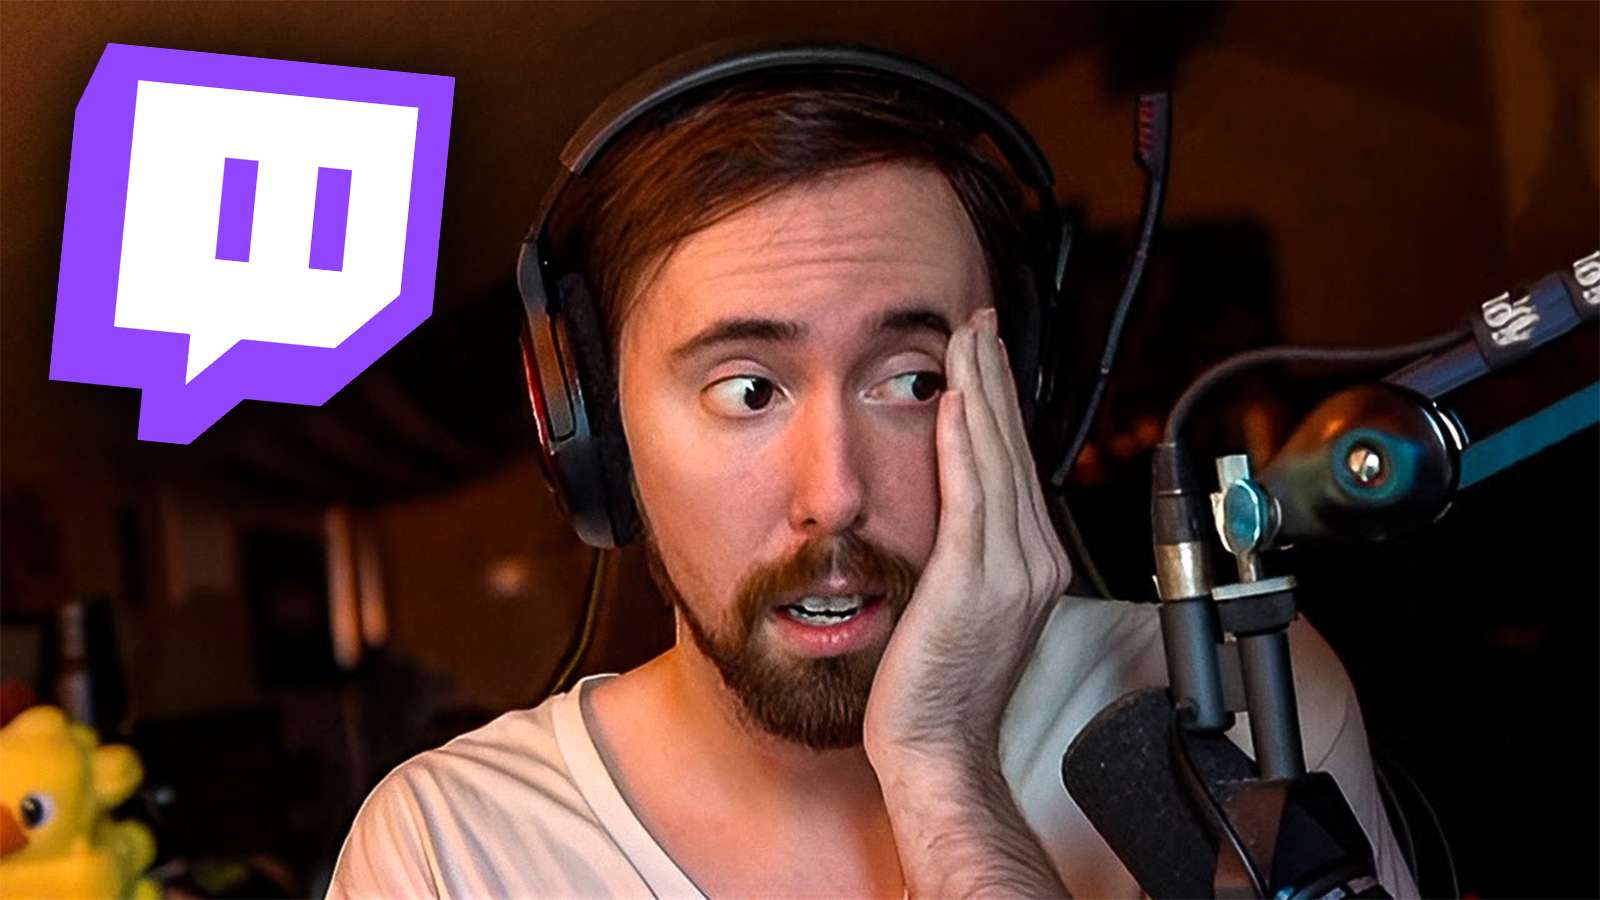 Asmongold calls for streamers to boycott Twitch amid new changes - Dexerto